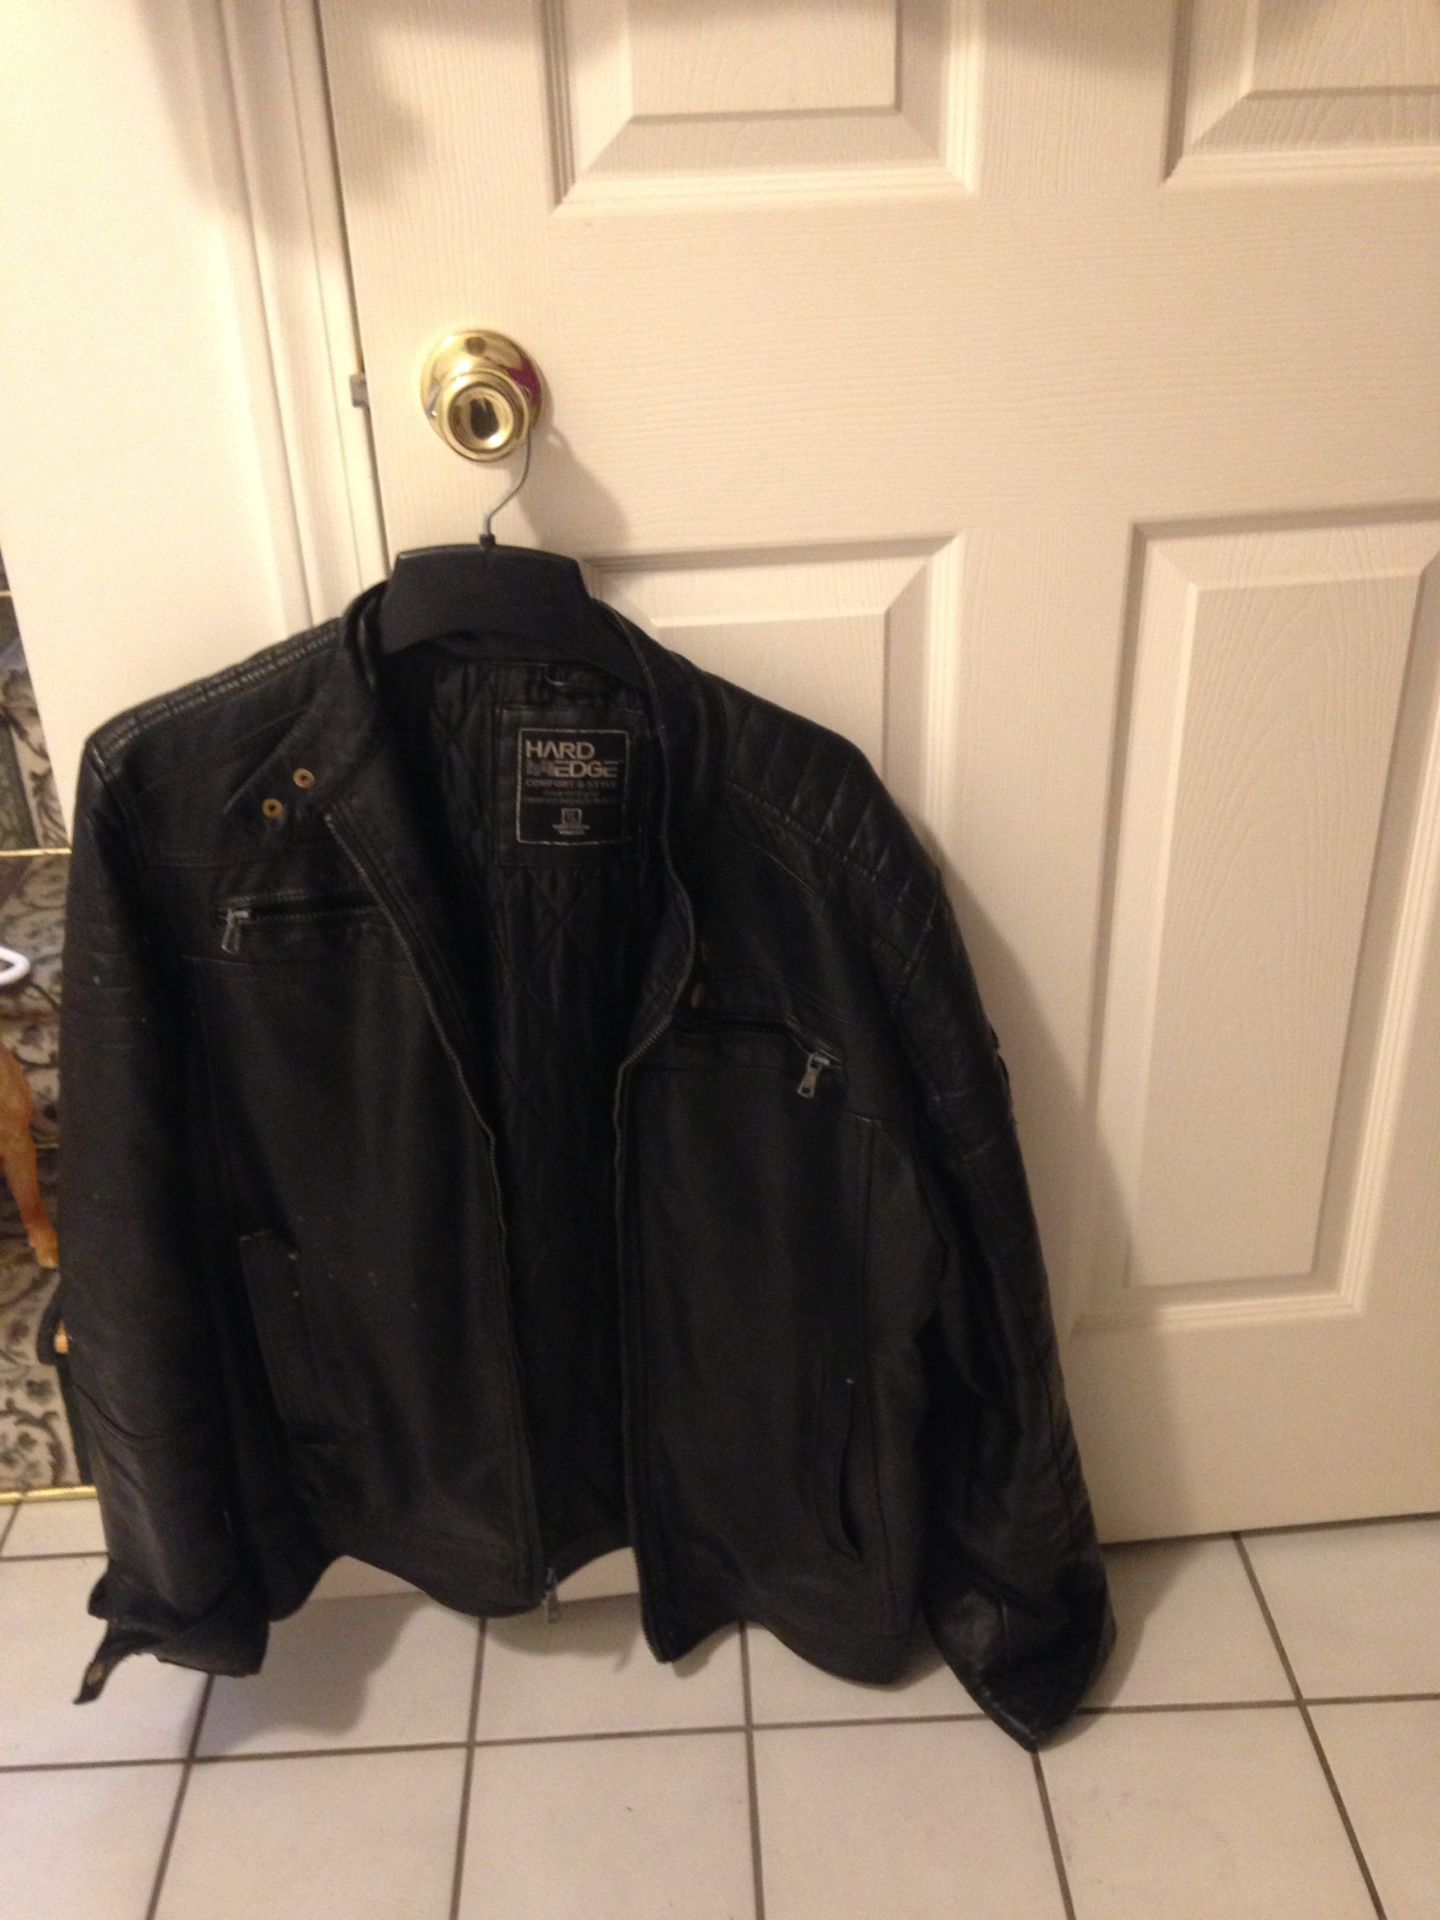 Hot Leathers Motorcycle Riding Jacket Mens Size 44 Just Reduced